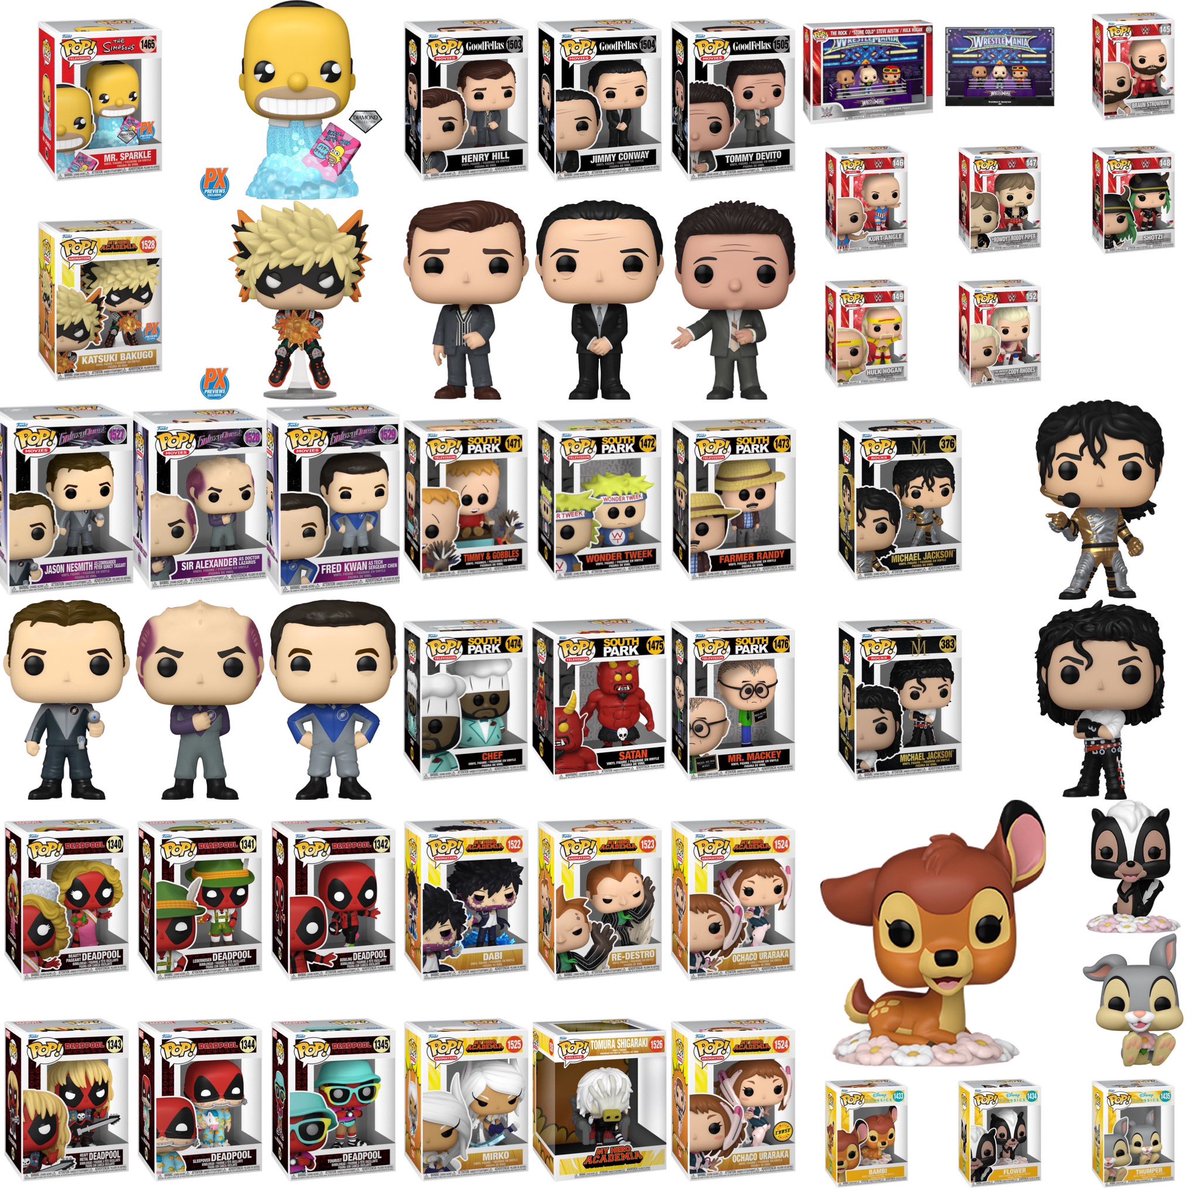 The new Funko releases are available at Amazon!
#Ad #TheSimpsons #MyHeroAcademia #Disney #Marvel #Goodfellas #GalaxyQuest #Deadpool #SouthPark #MichaelJackson
.
amzn.to/4aUur3v
.
#Funko #FunkoPop #FunkoPopVinyl #Pop #PopVinyl #Collectibles #Collectible #FunkoCollector…